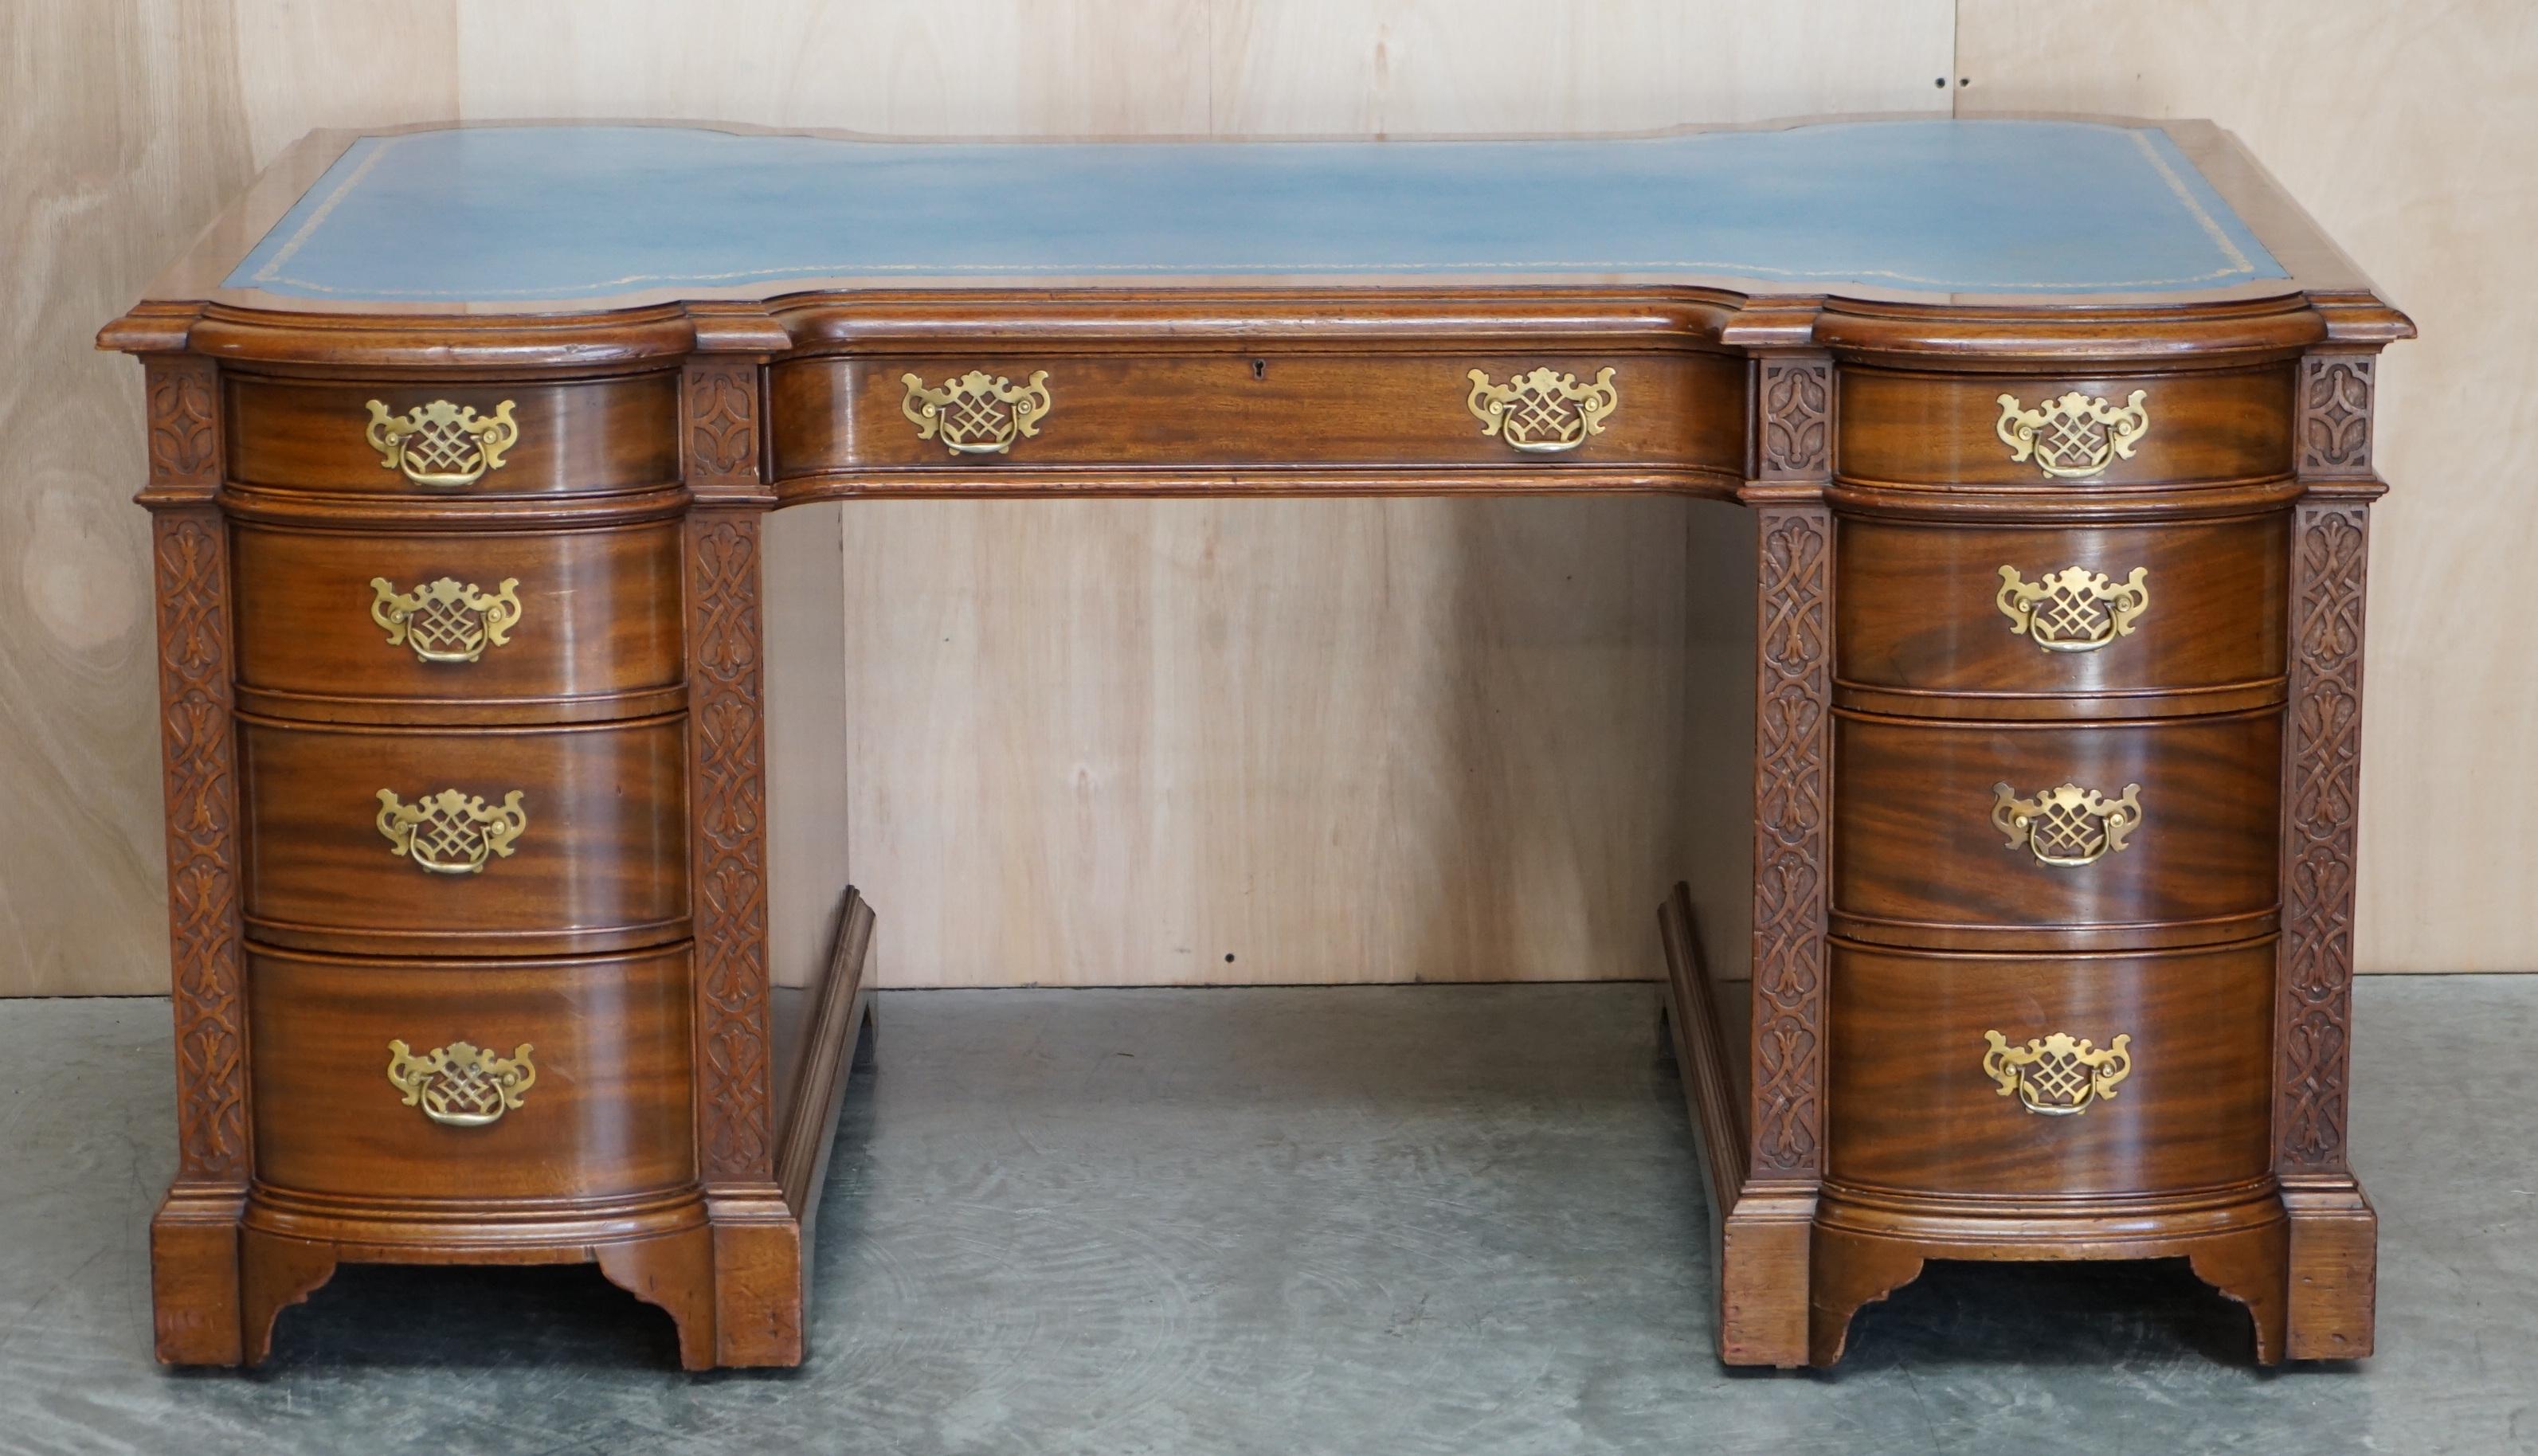 We are delighted to offer this lovely Thomas Chippendale Revival twin pedestal, double sided, partner desk with Regency Blue Leather top

A very good looking and well made desk, it is a copy of an original Thomas Chippendale desk, double sided